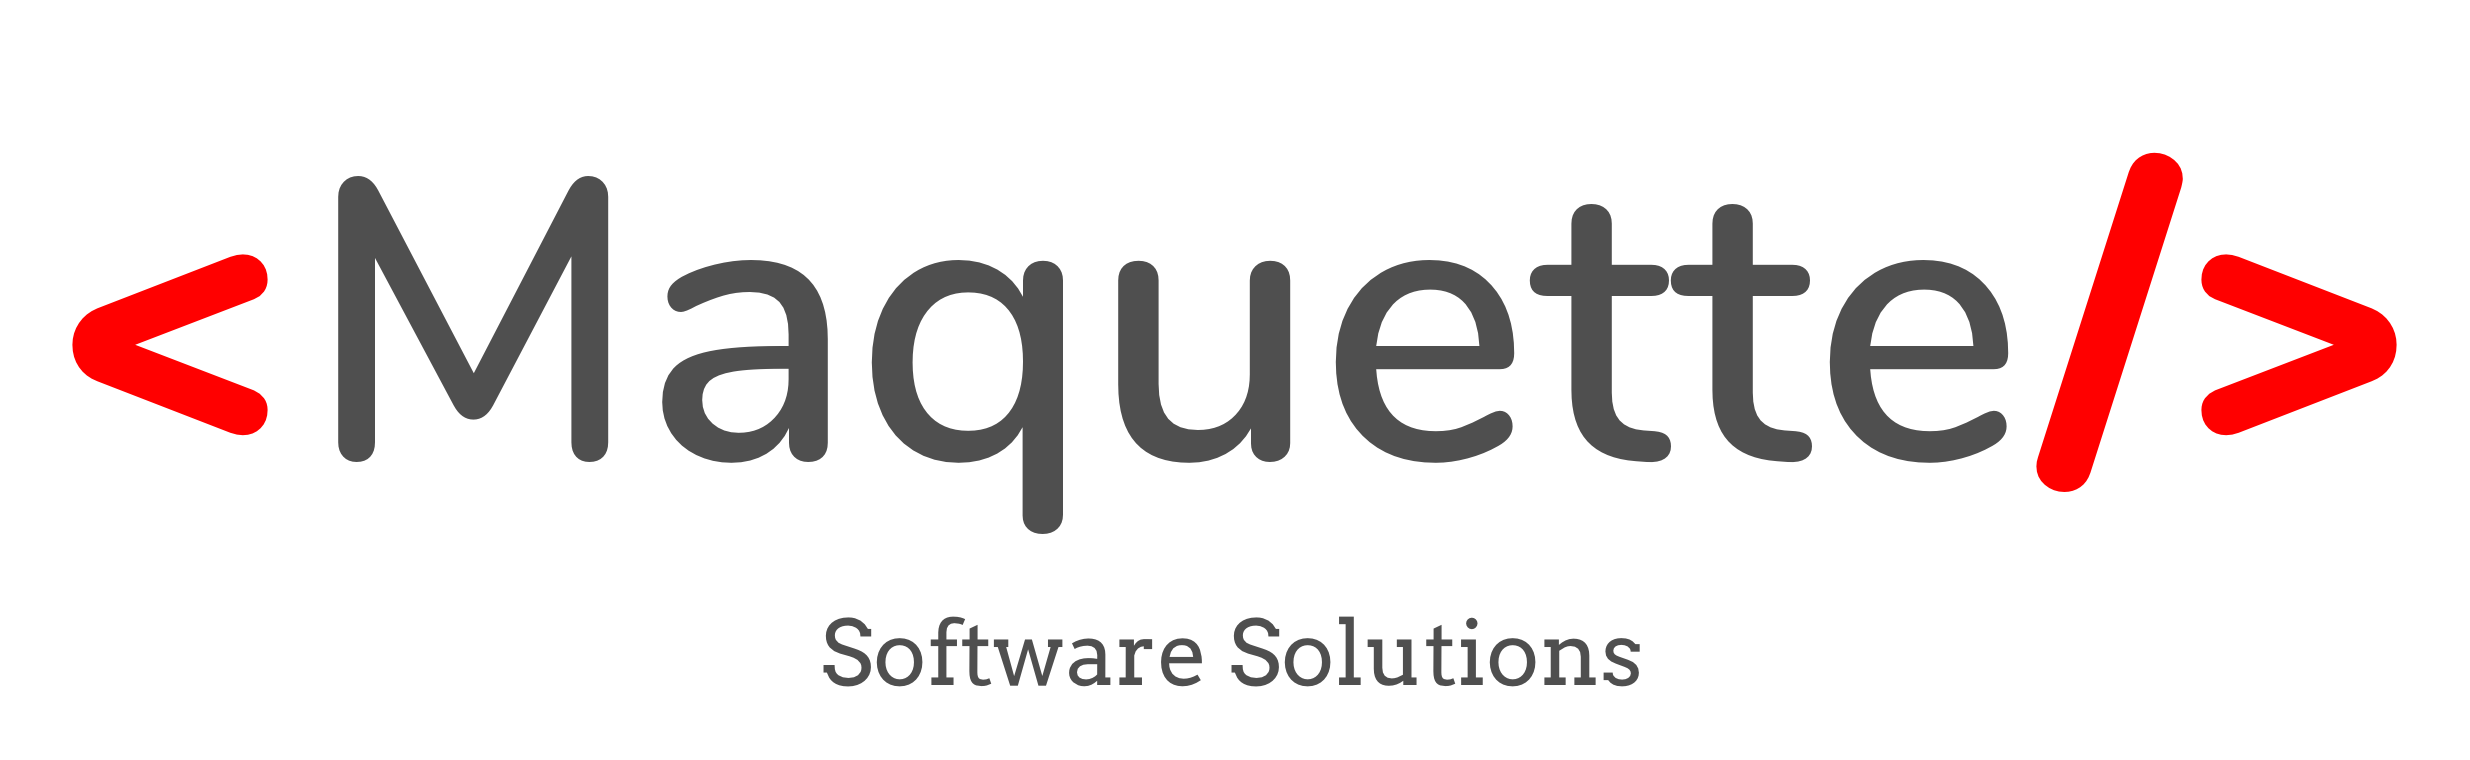 Maquette Software Solutions logo